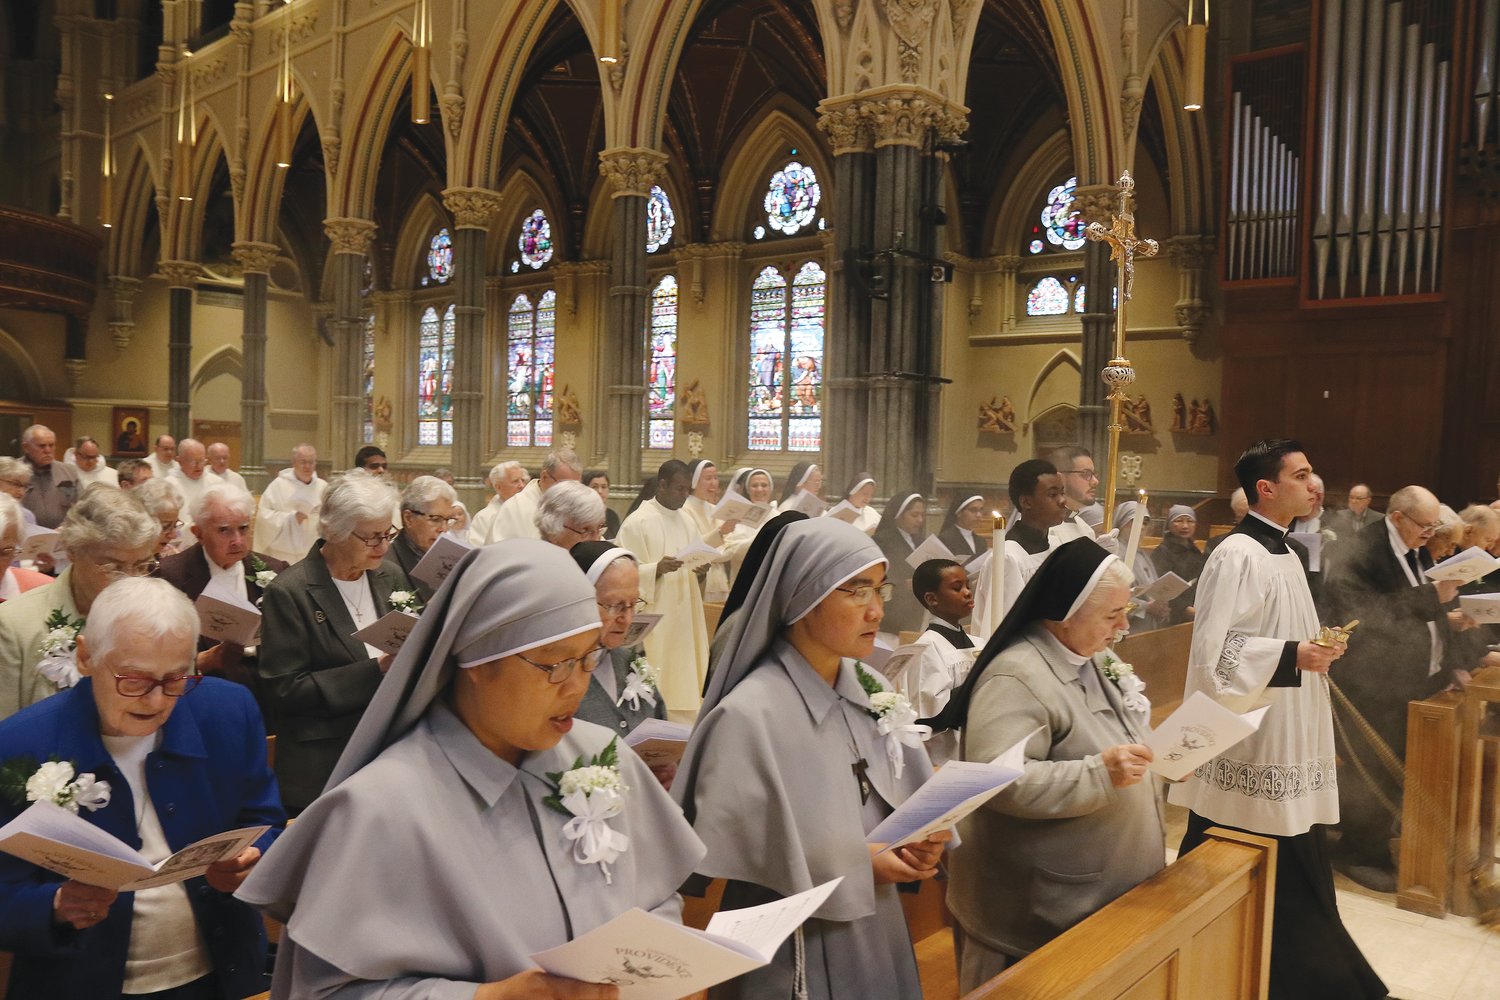 Bishop Thomas J. Tobin celebrated Holy Mass to commemorate the service of Religious Jubilarians on Saturday, April 23, in the Cathedral of Saints Peter and Paul, Providence.